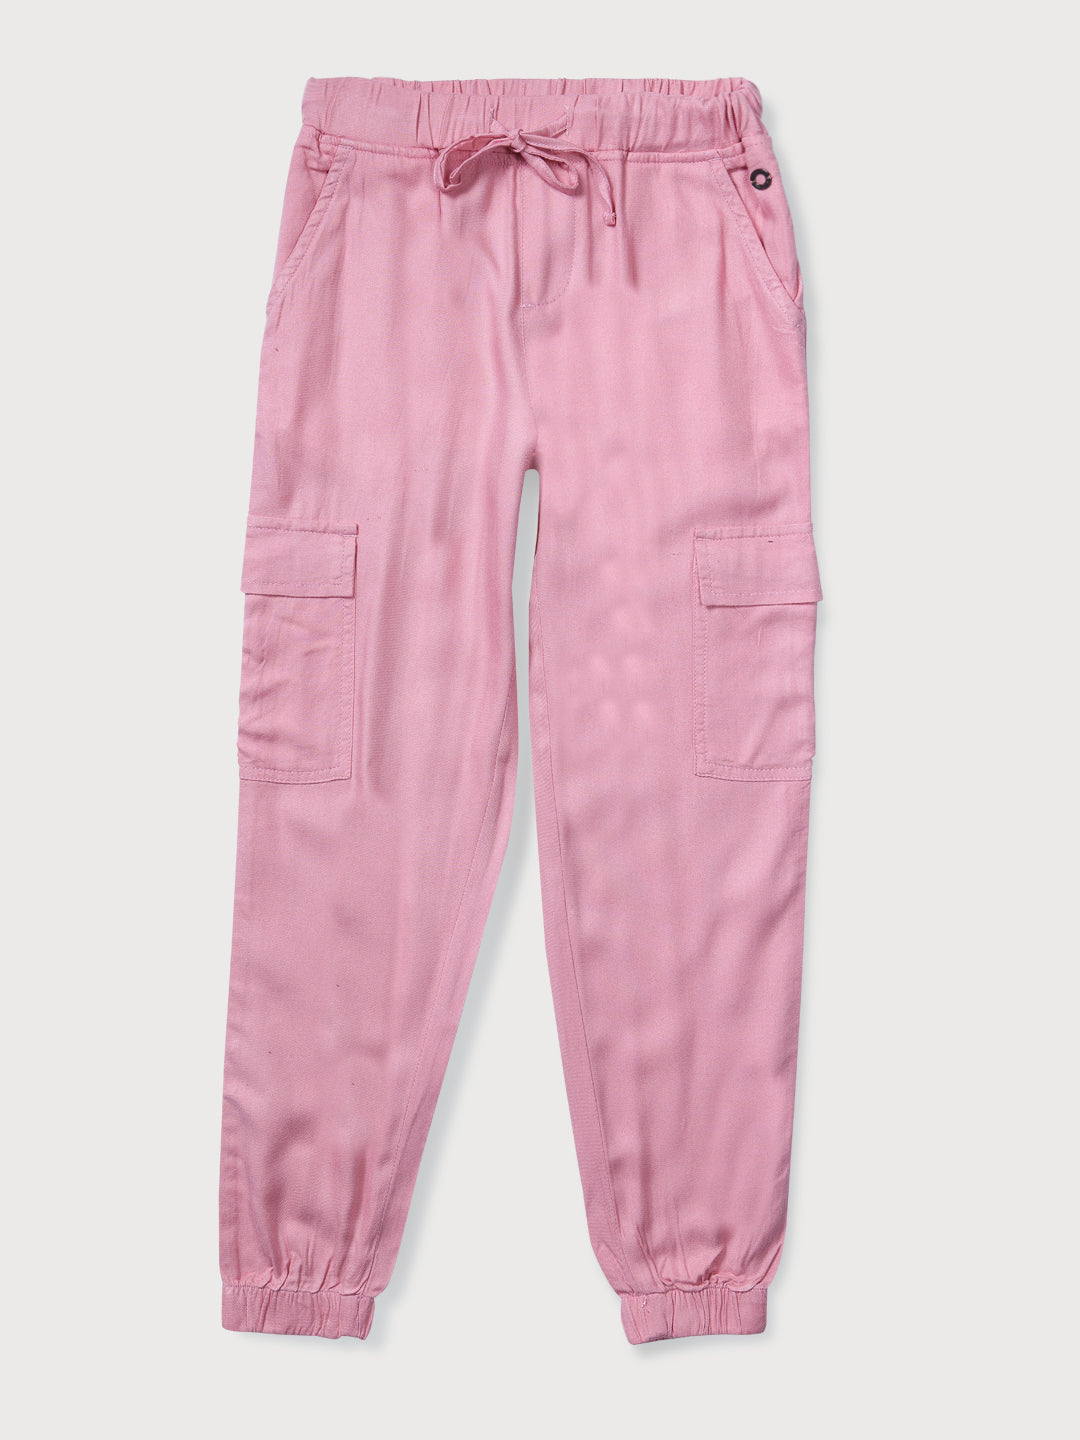 Girls Pink Solid Woven Joggers